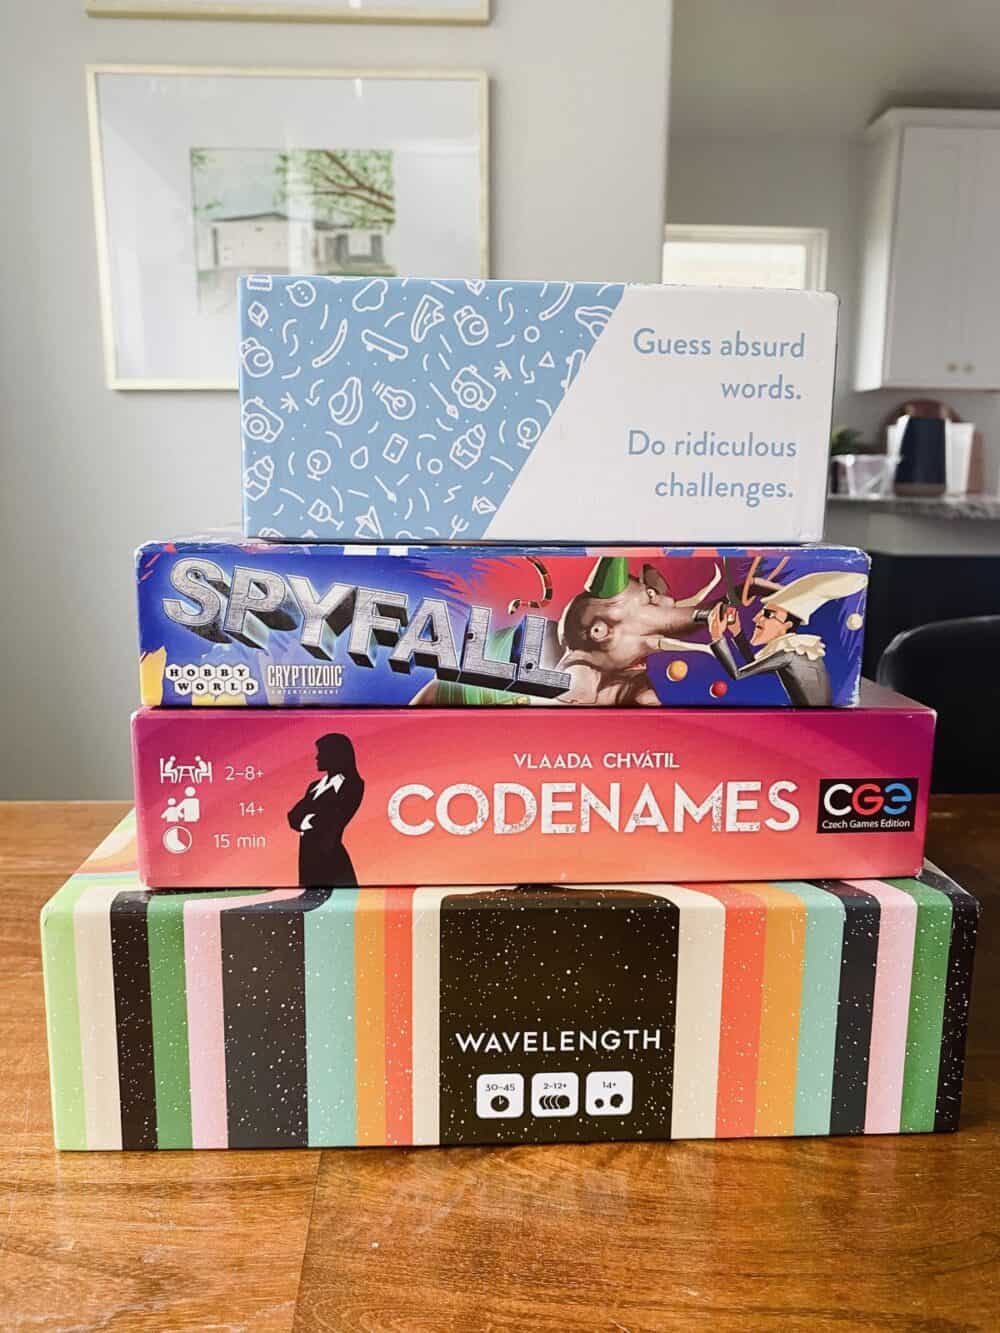 Stack of board games, includes Wavelength, Codenames, Spyfall, and Rabble